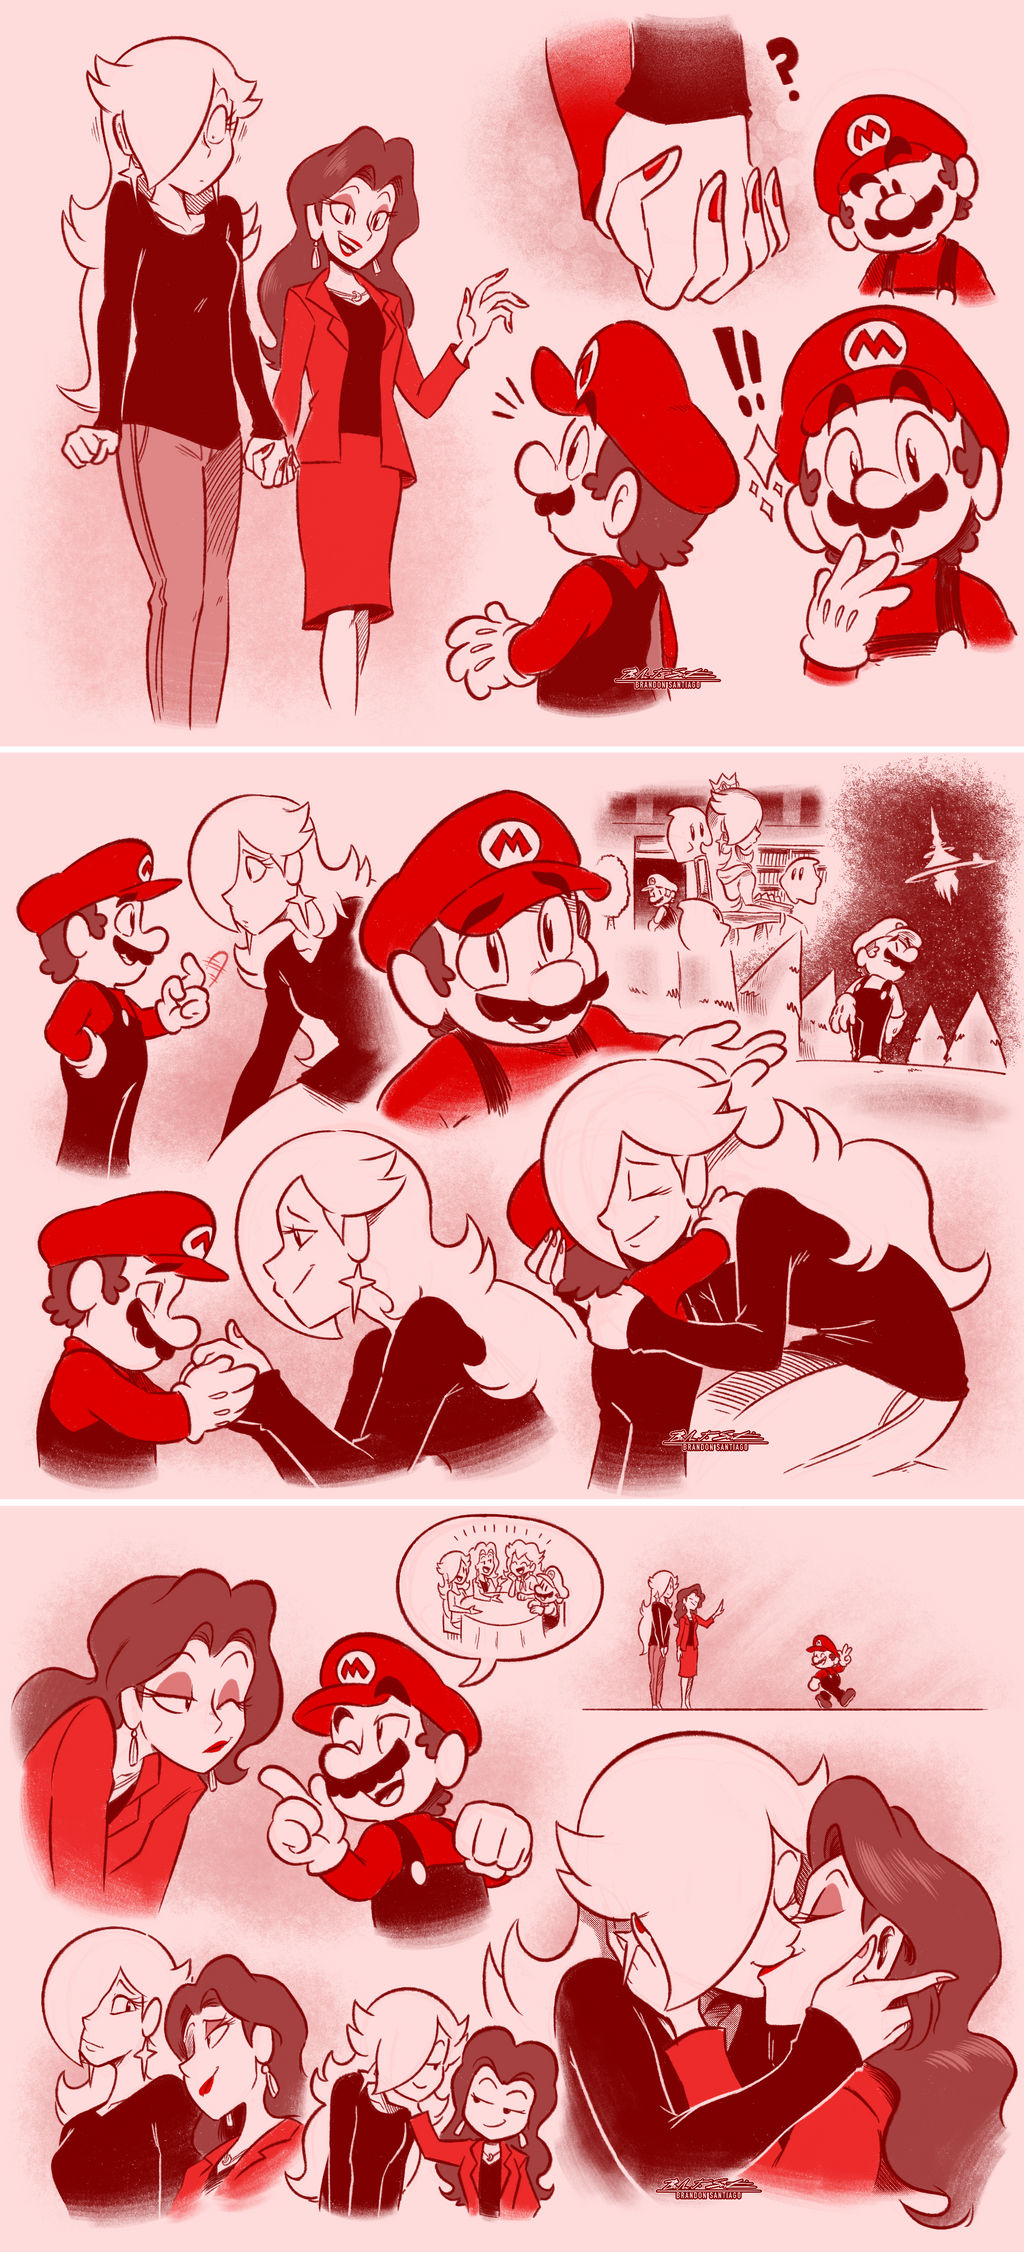 mario_finds_out_by_outcastcomix_dgubmwt-fullview.jpg